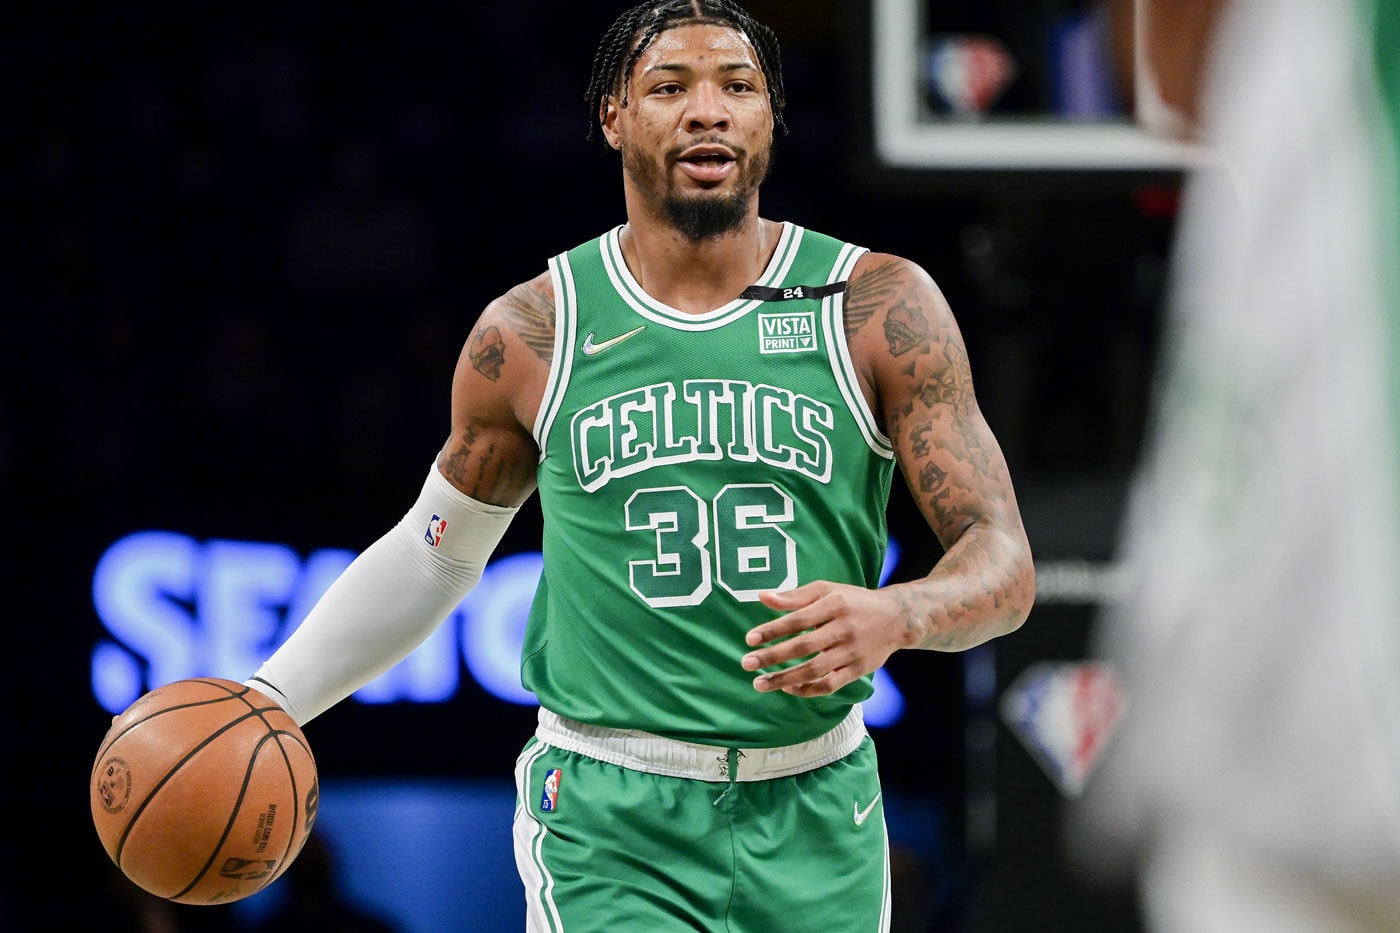 Marcus Smart Boston Celtics NBA defensive player of the year award first time guard since 1996 2022 votes news